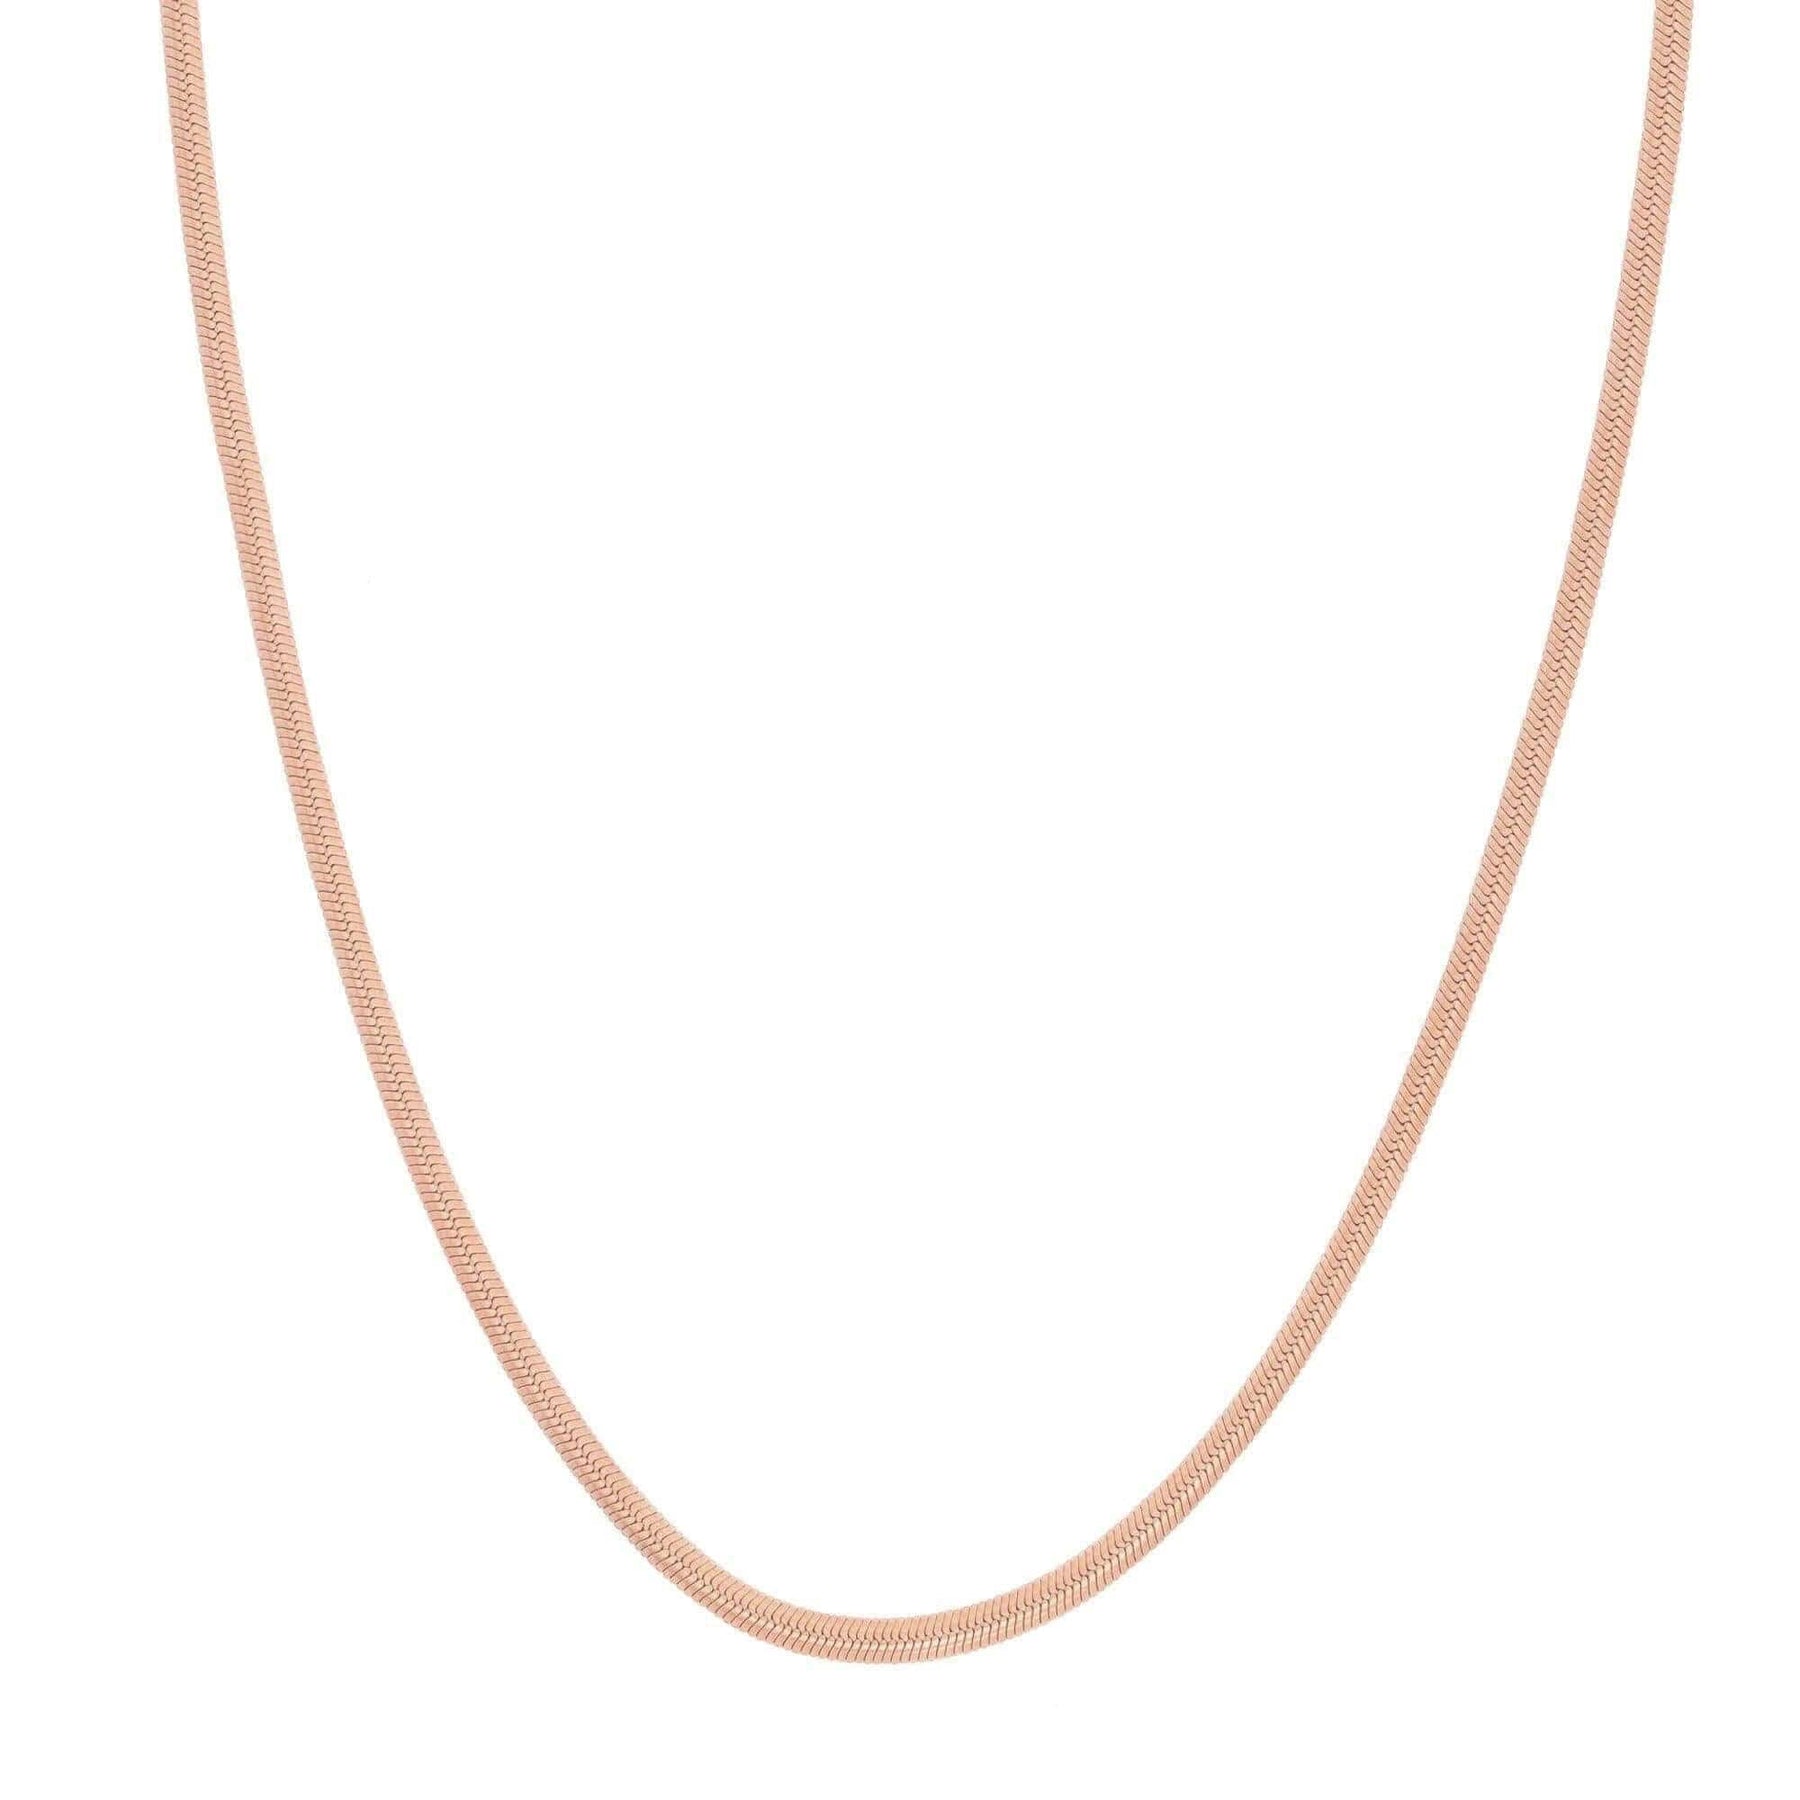 BohoMoon Stainless Steel Emilia Choker / Necklace Rose Gold / Necklace